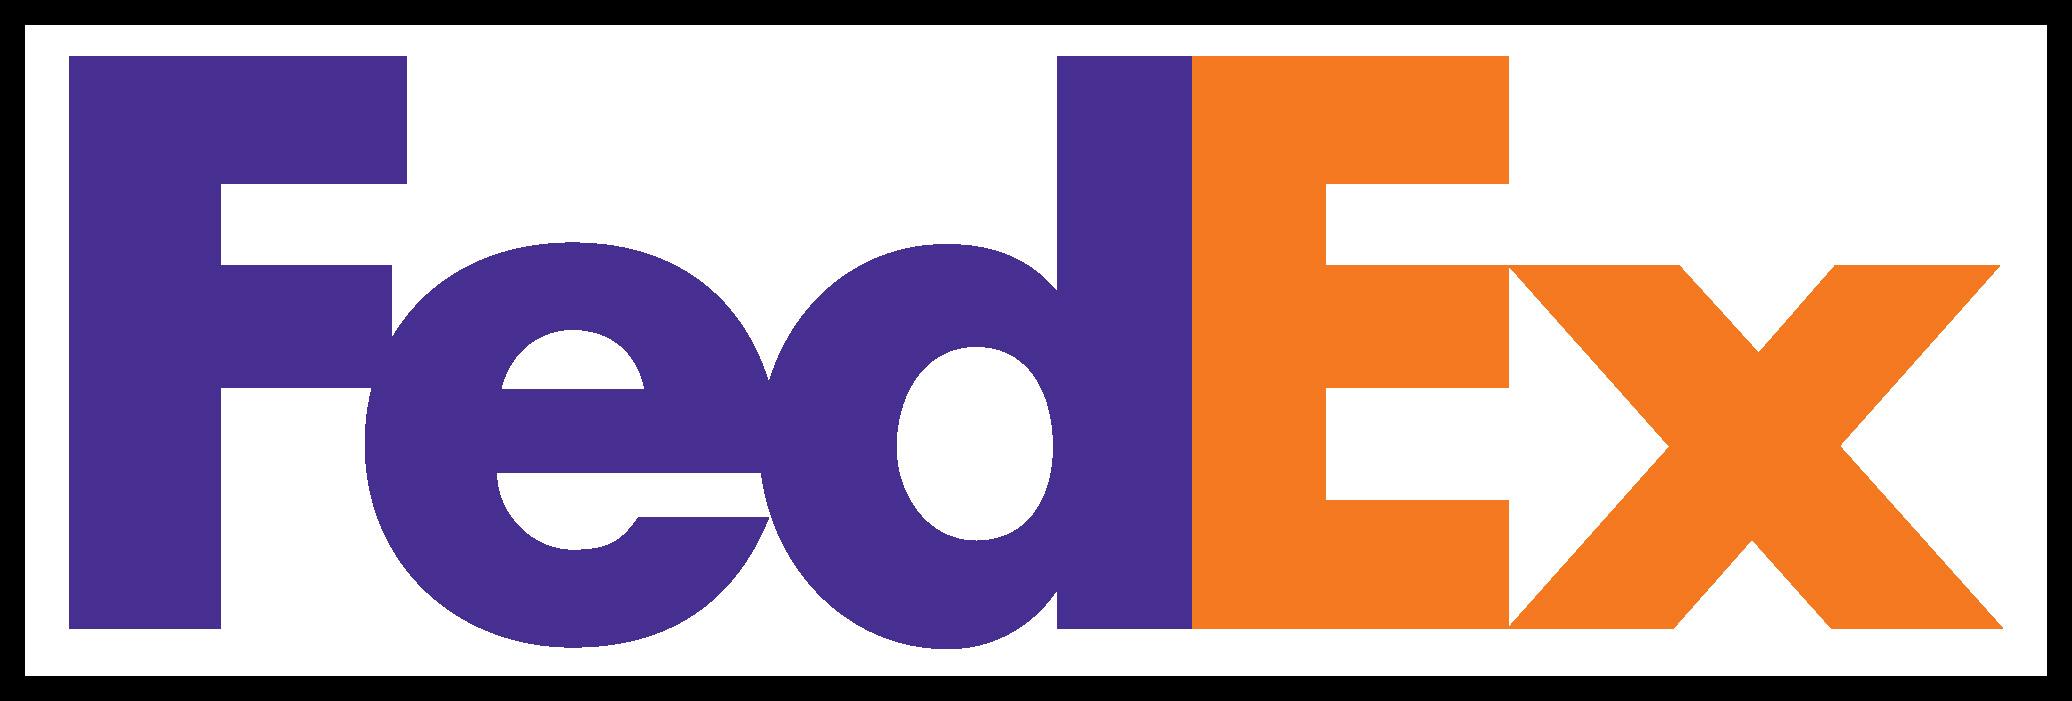 FedEx Ex Logo - The Heart of Innovation: What You Can Learn from the FedEx Logo in ...